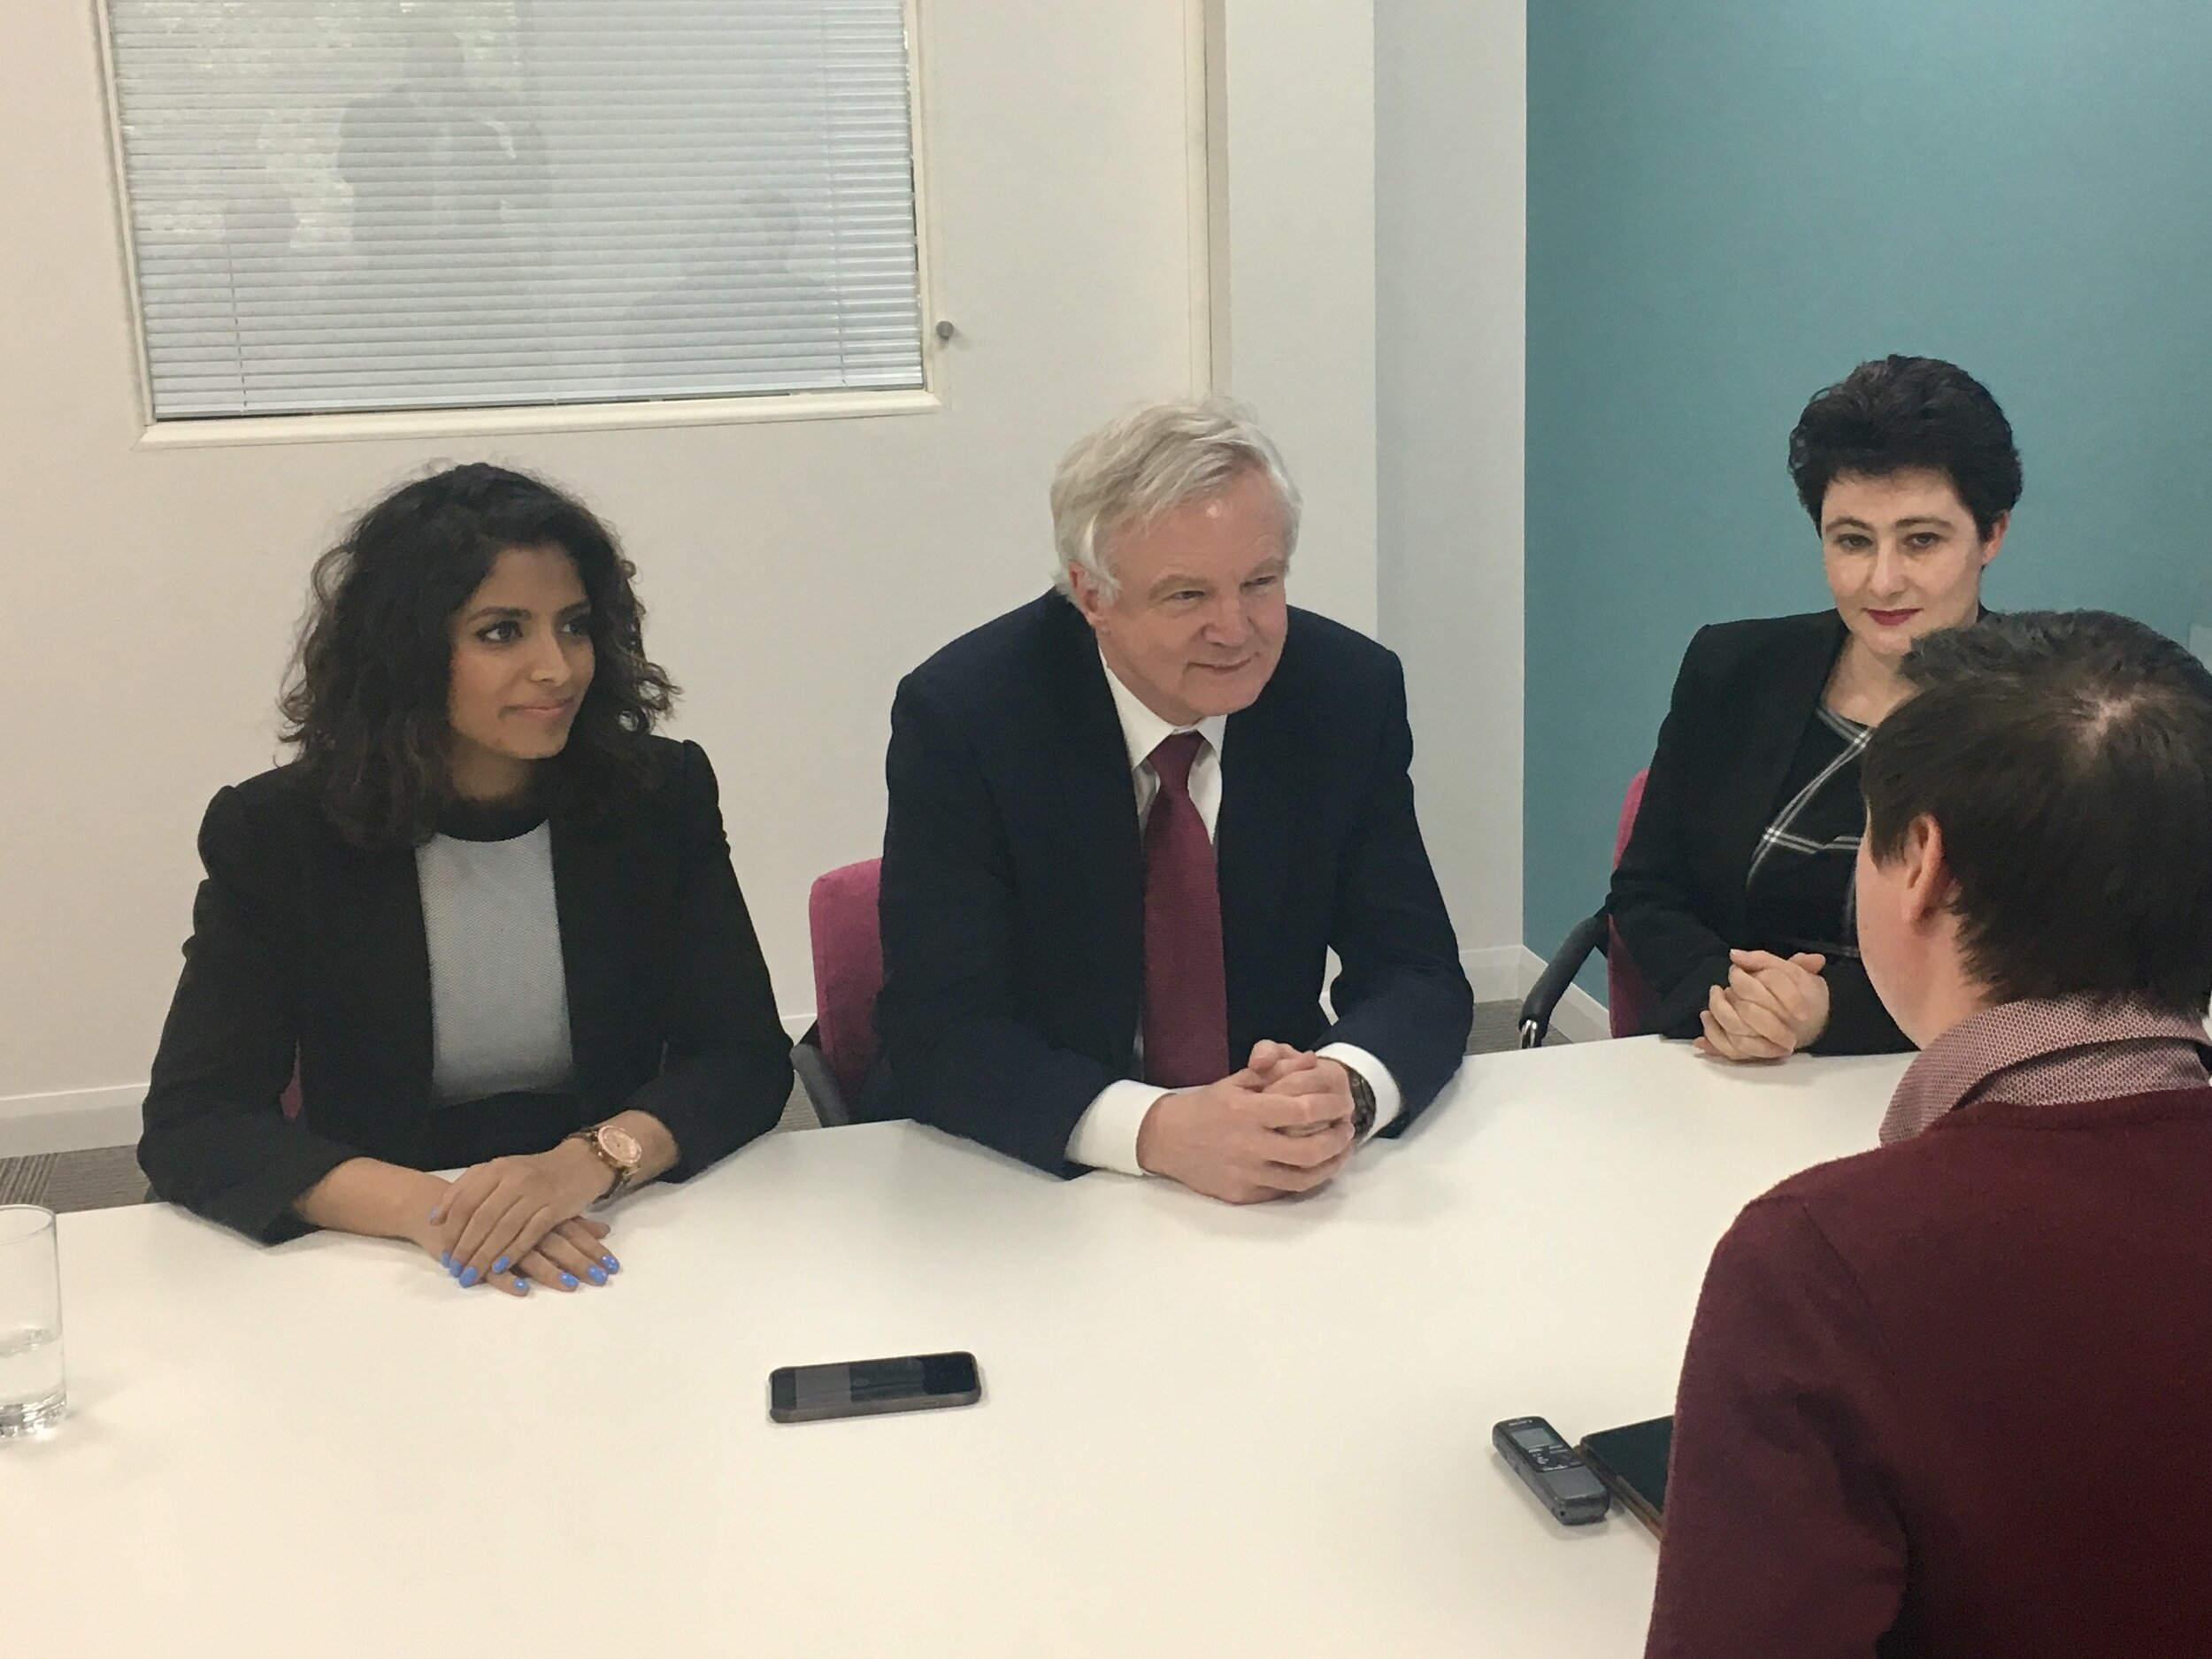 Interview with The Rt. Hon. David Davis MP, 2017